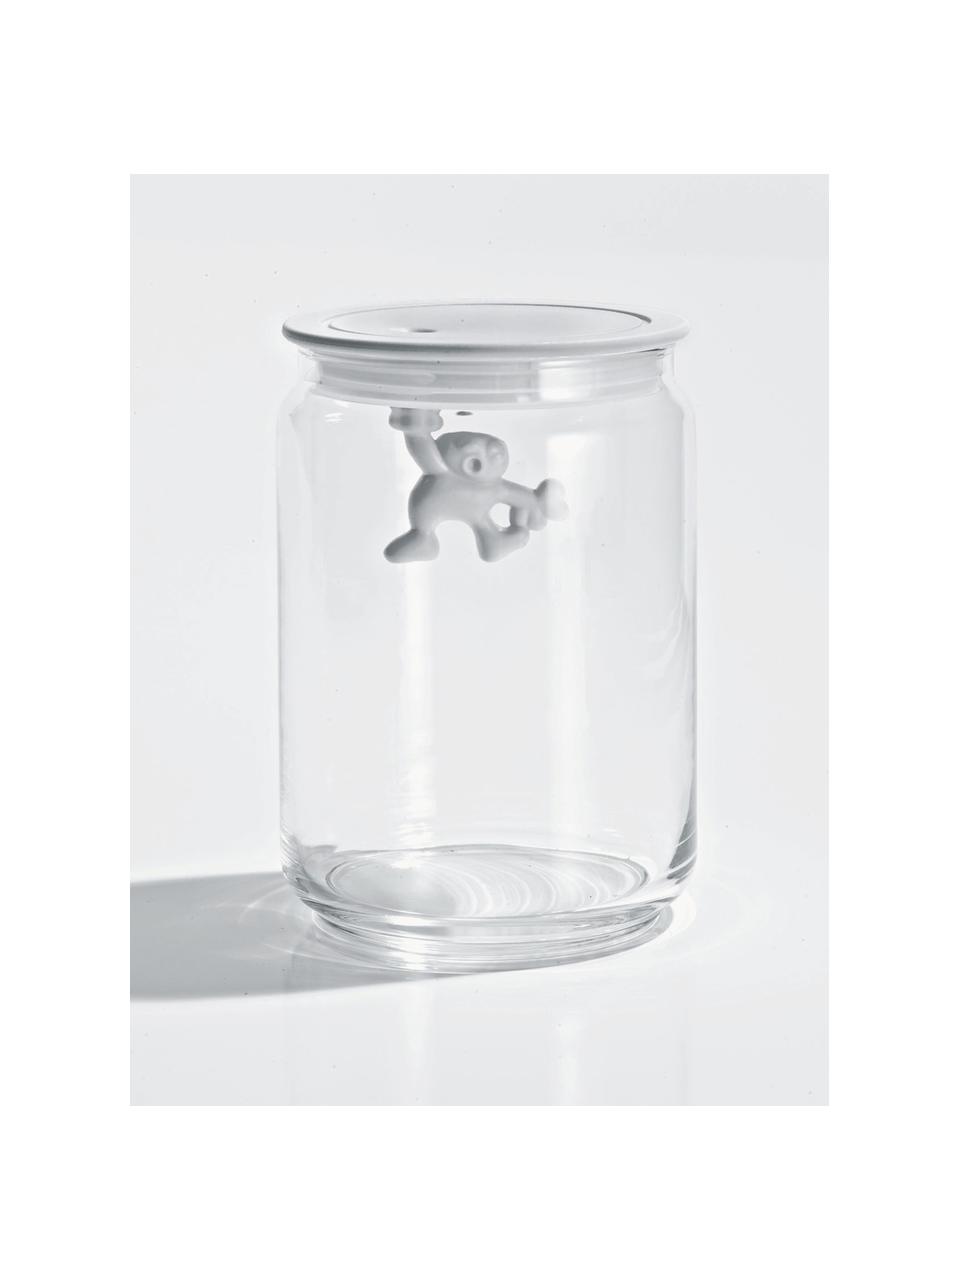 Opbergpot Gianni, H 15 cm, Glas, thermoplastische hars, Wit, transparant, Ø 11 x H 15 cm